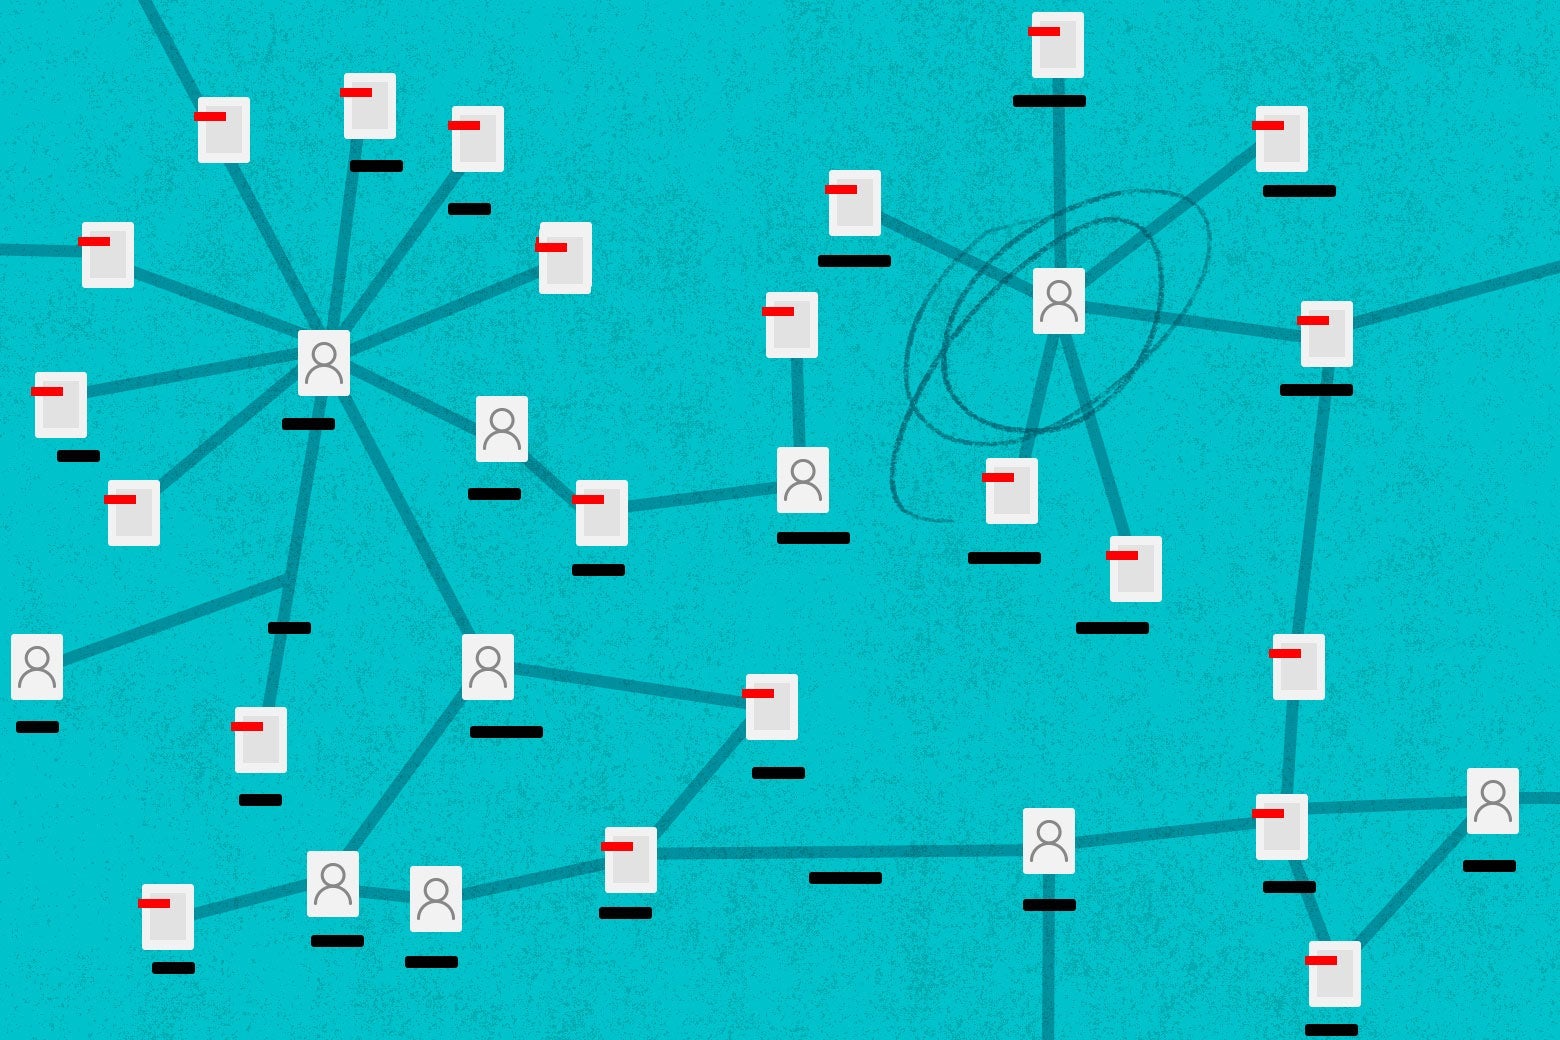 An illustration of a social network shows lines connecting people and files.